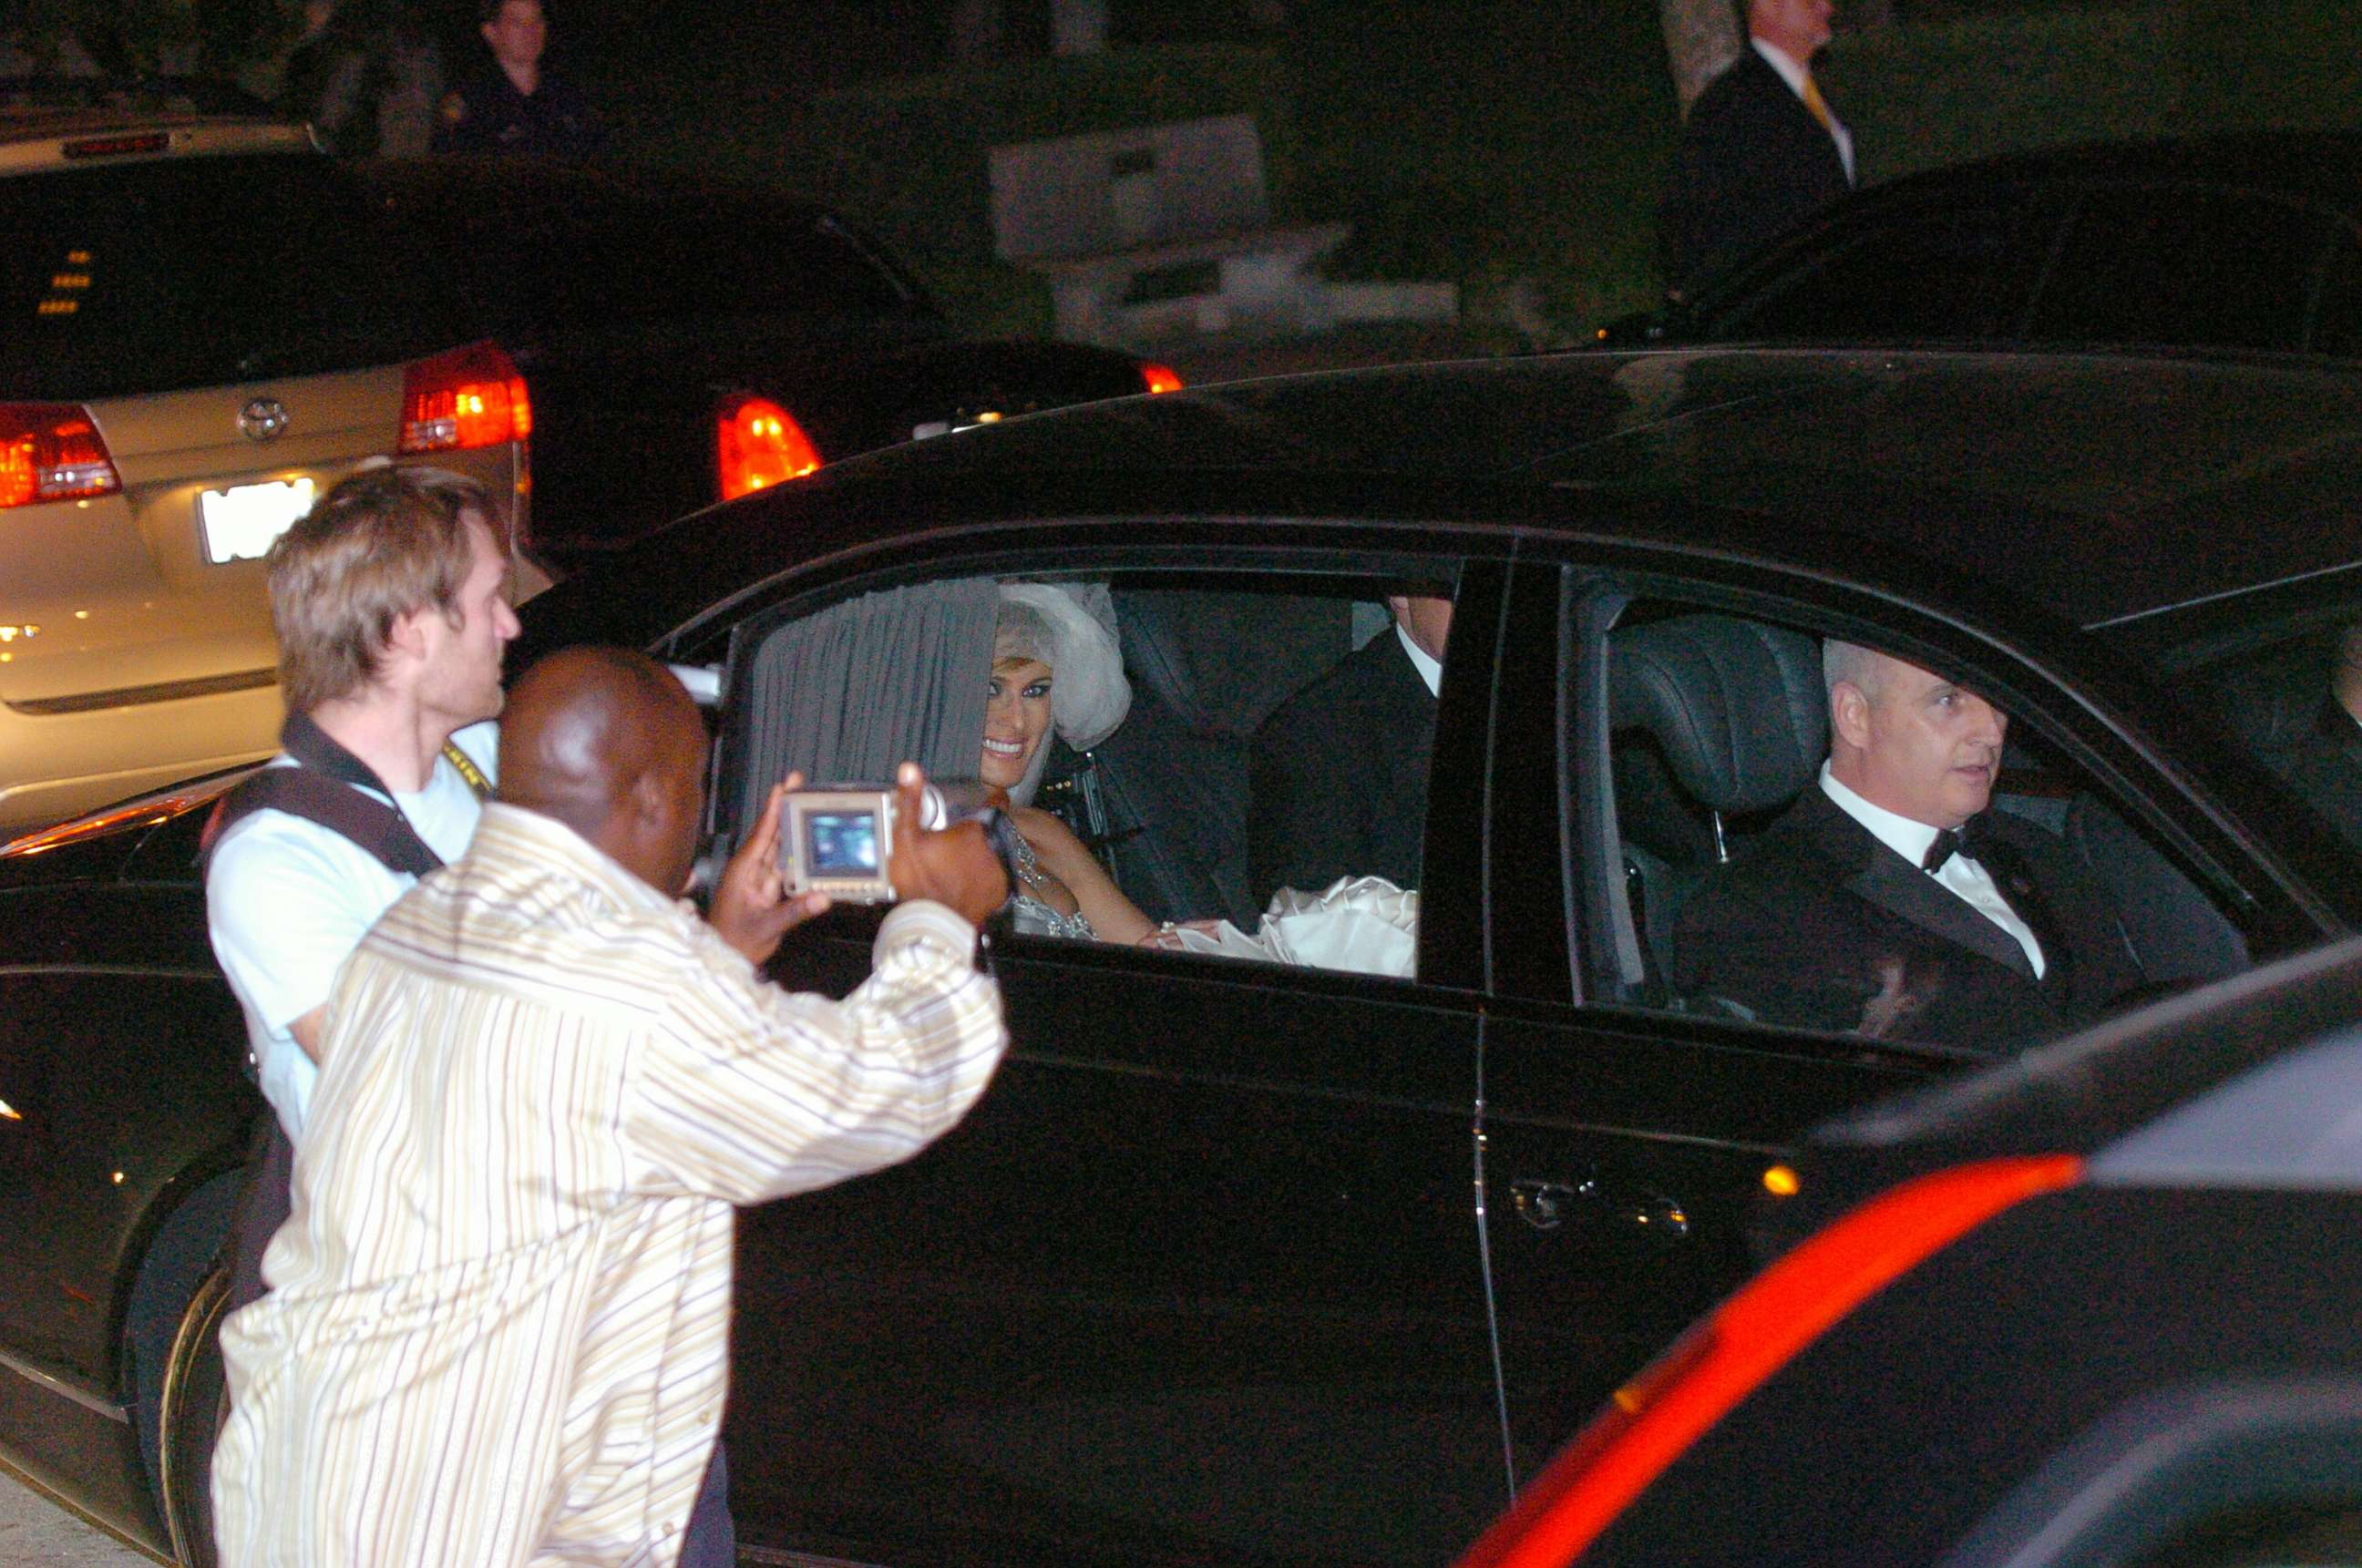 PHOTO: Photographers snap pictures as a beaming Melania Knauss and new husband Donald Trump  leave the Episcopal Church of Bethesda-by-the-Sea in Palm Beach, Fla., after their star-studded wedding ceremony, Jan. 22, 2005.